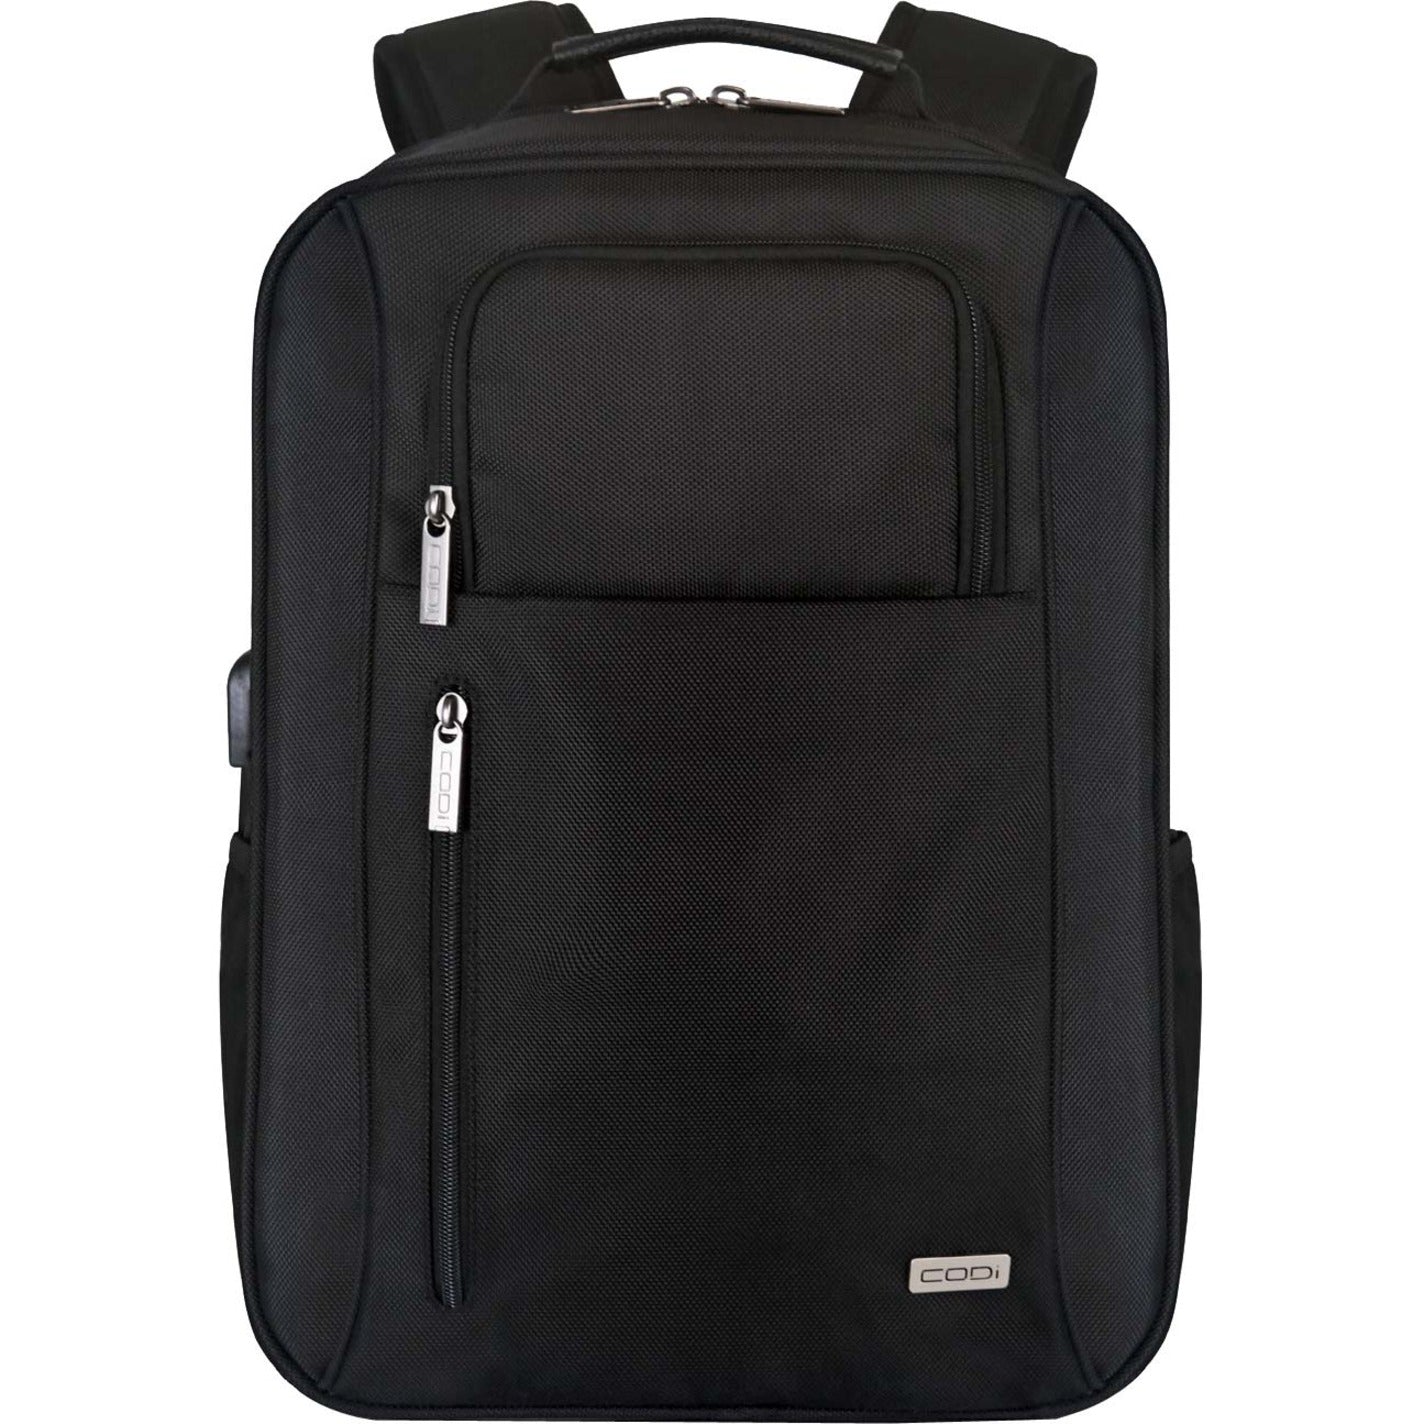 CODi MAG702-4 Magna 17.3" Backpack, Water Bottle, Key, Power Bank, Tablet, Notebook, Checkpoint Friendly